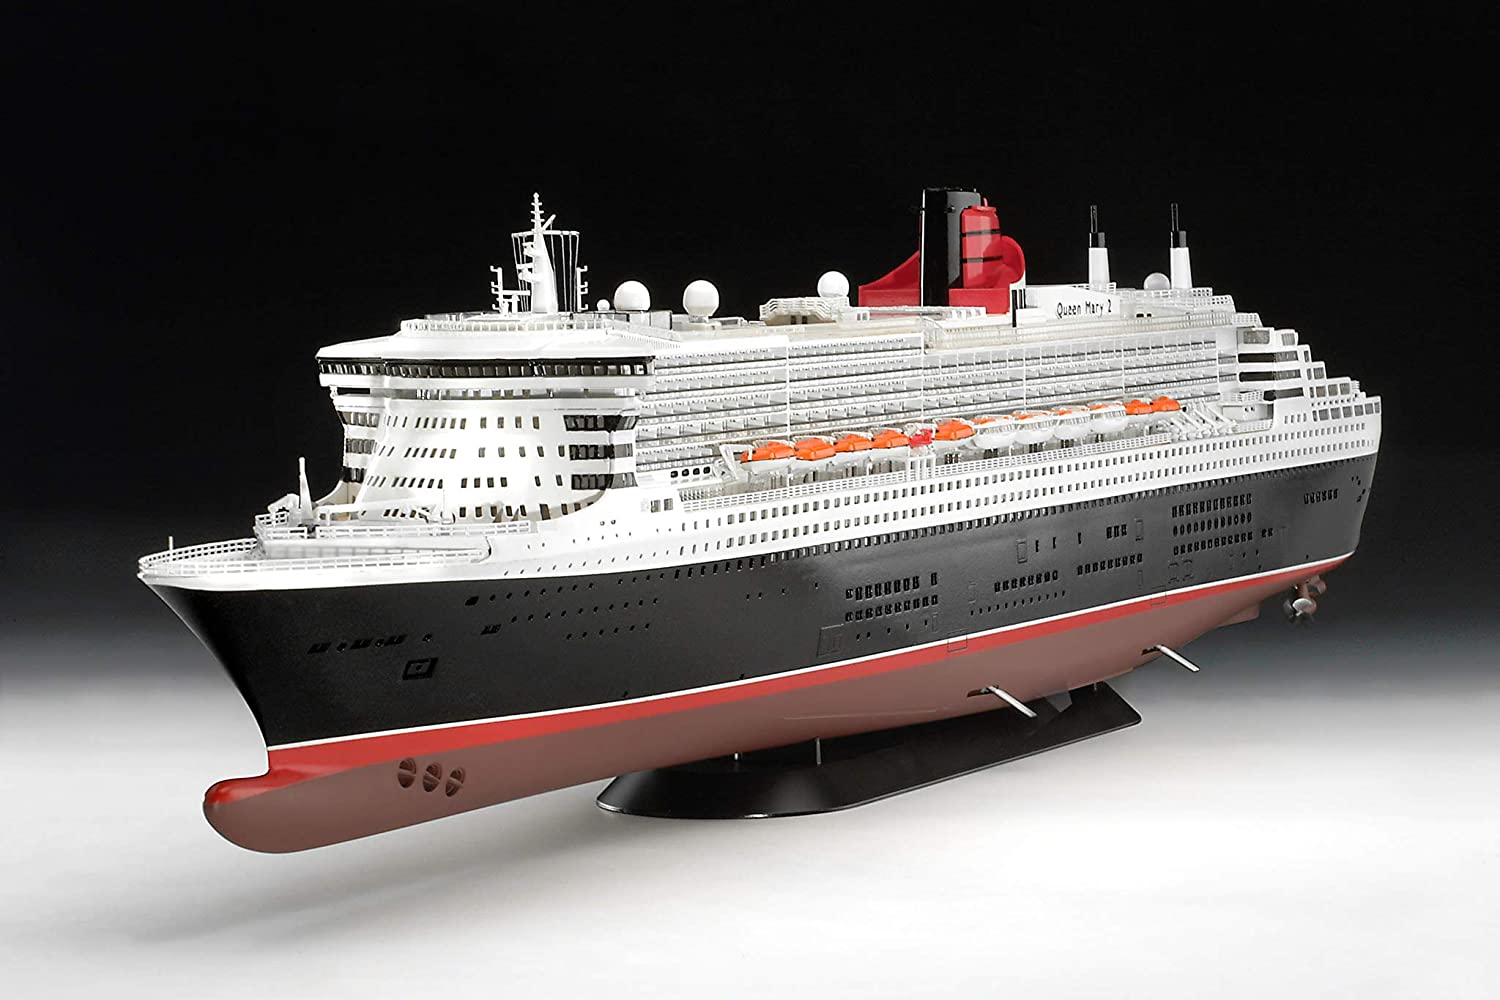 Revell 05199 - Queen Mary 2 - Platinum Edition